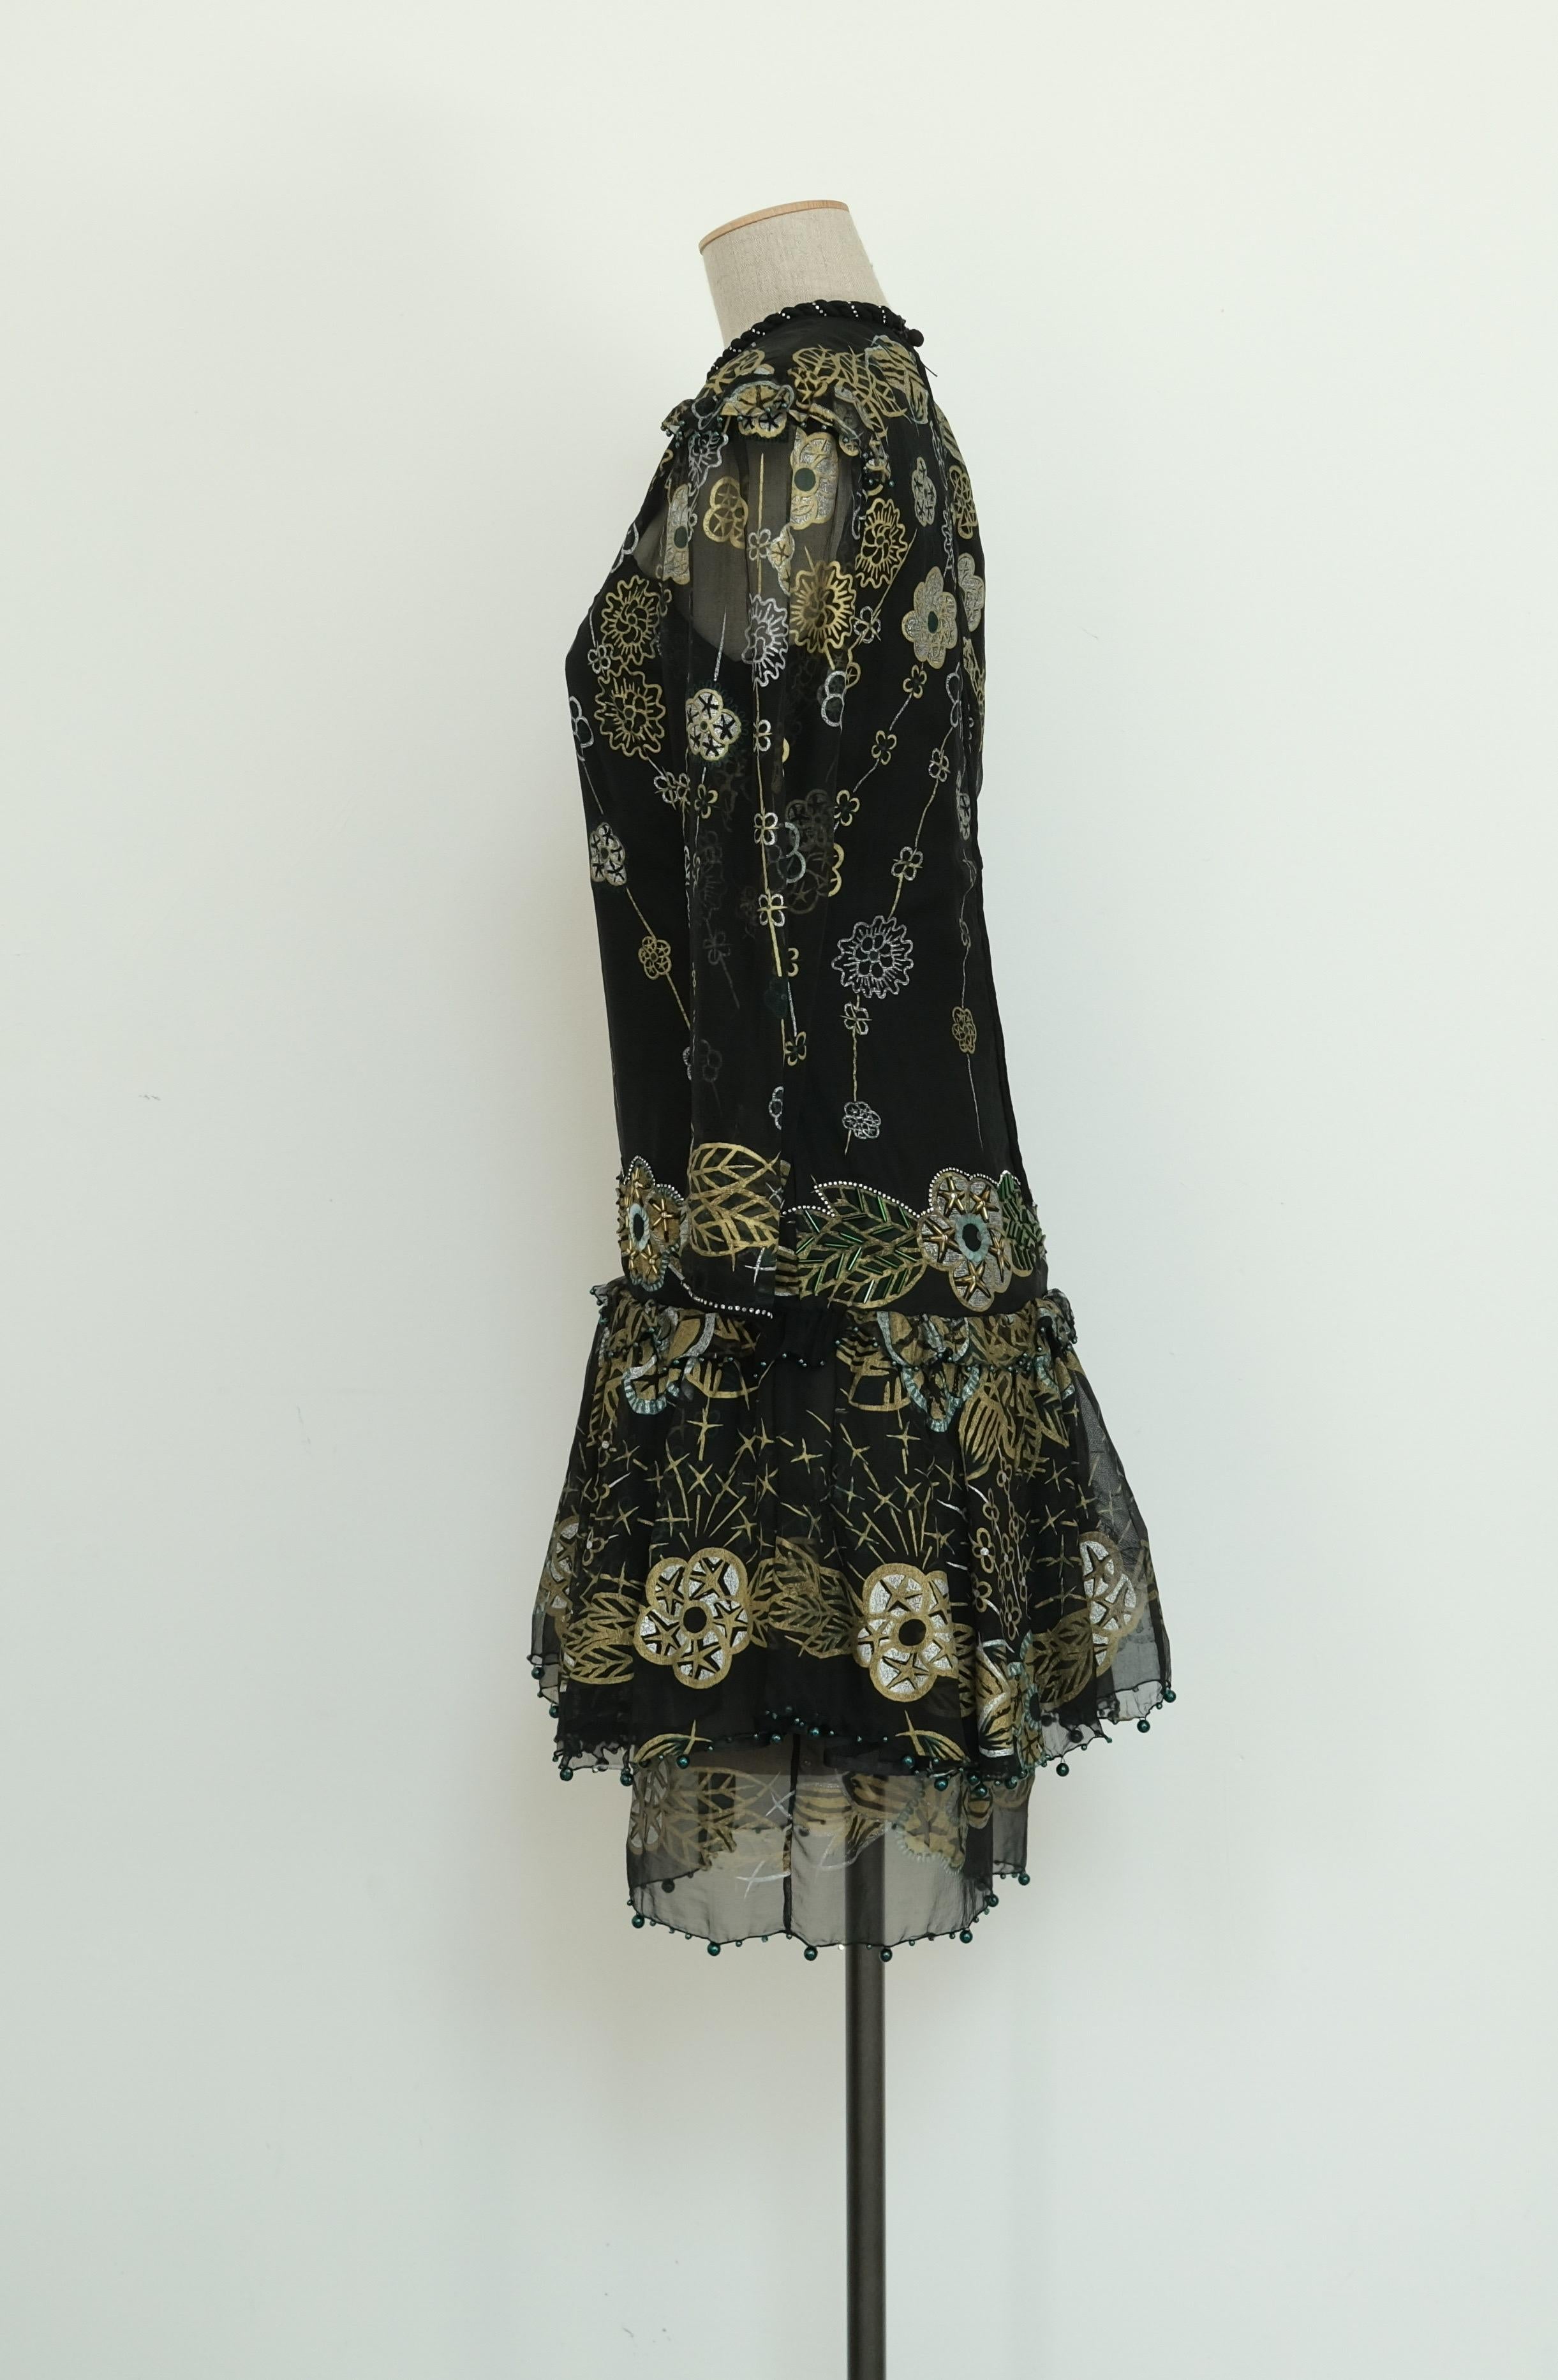 - Zandra Rhodes 
- 80s
- Hand made in England
- UK size 10
- Silk chiffon
- Black with gold and silver hand printed pattern
- Hand embellished with sequins beads and crystals
- Sheer sleeves and front panel
- Teared skirt finished with green beads
-